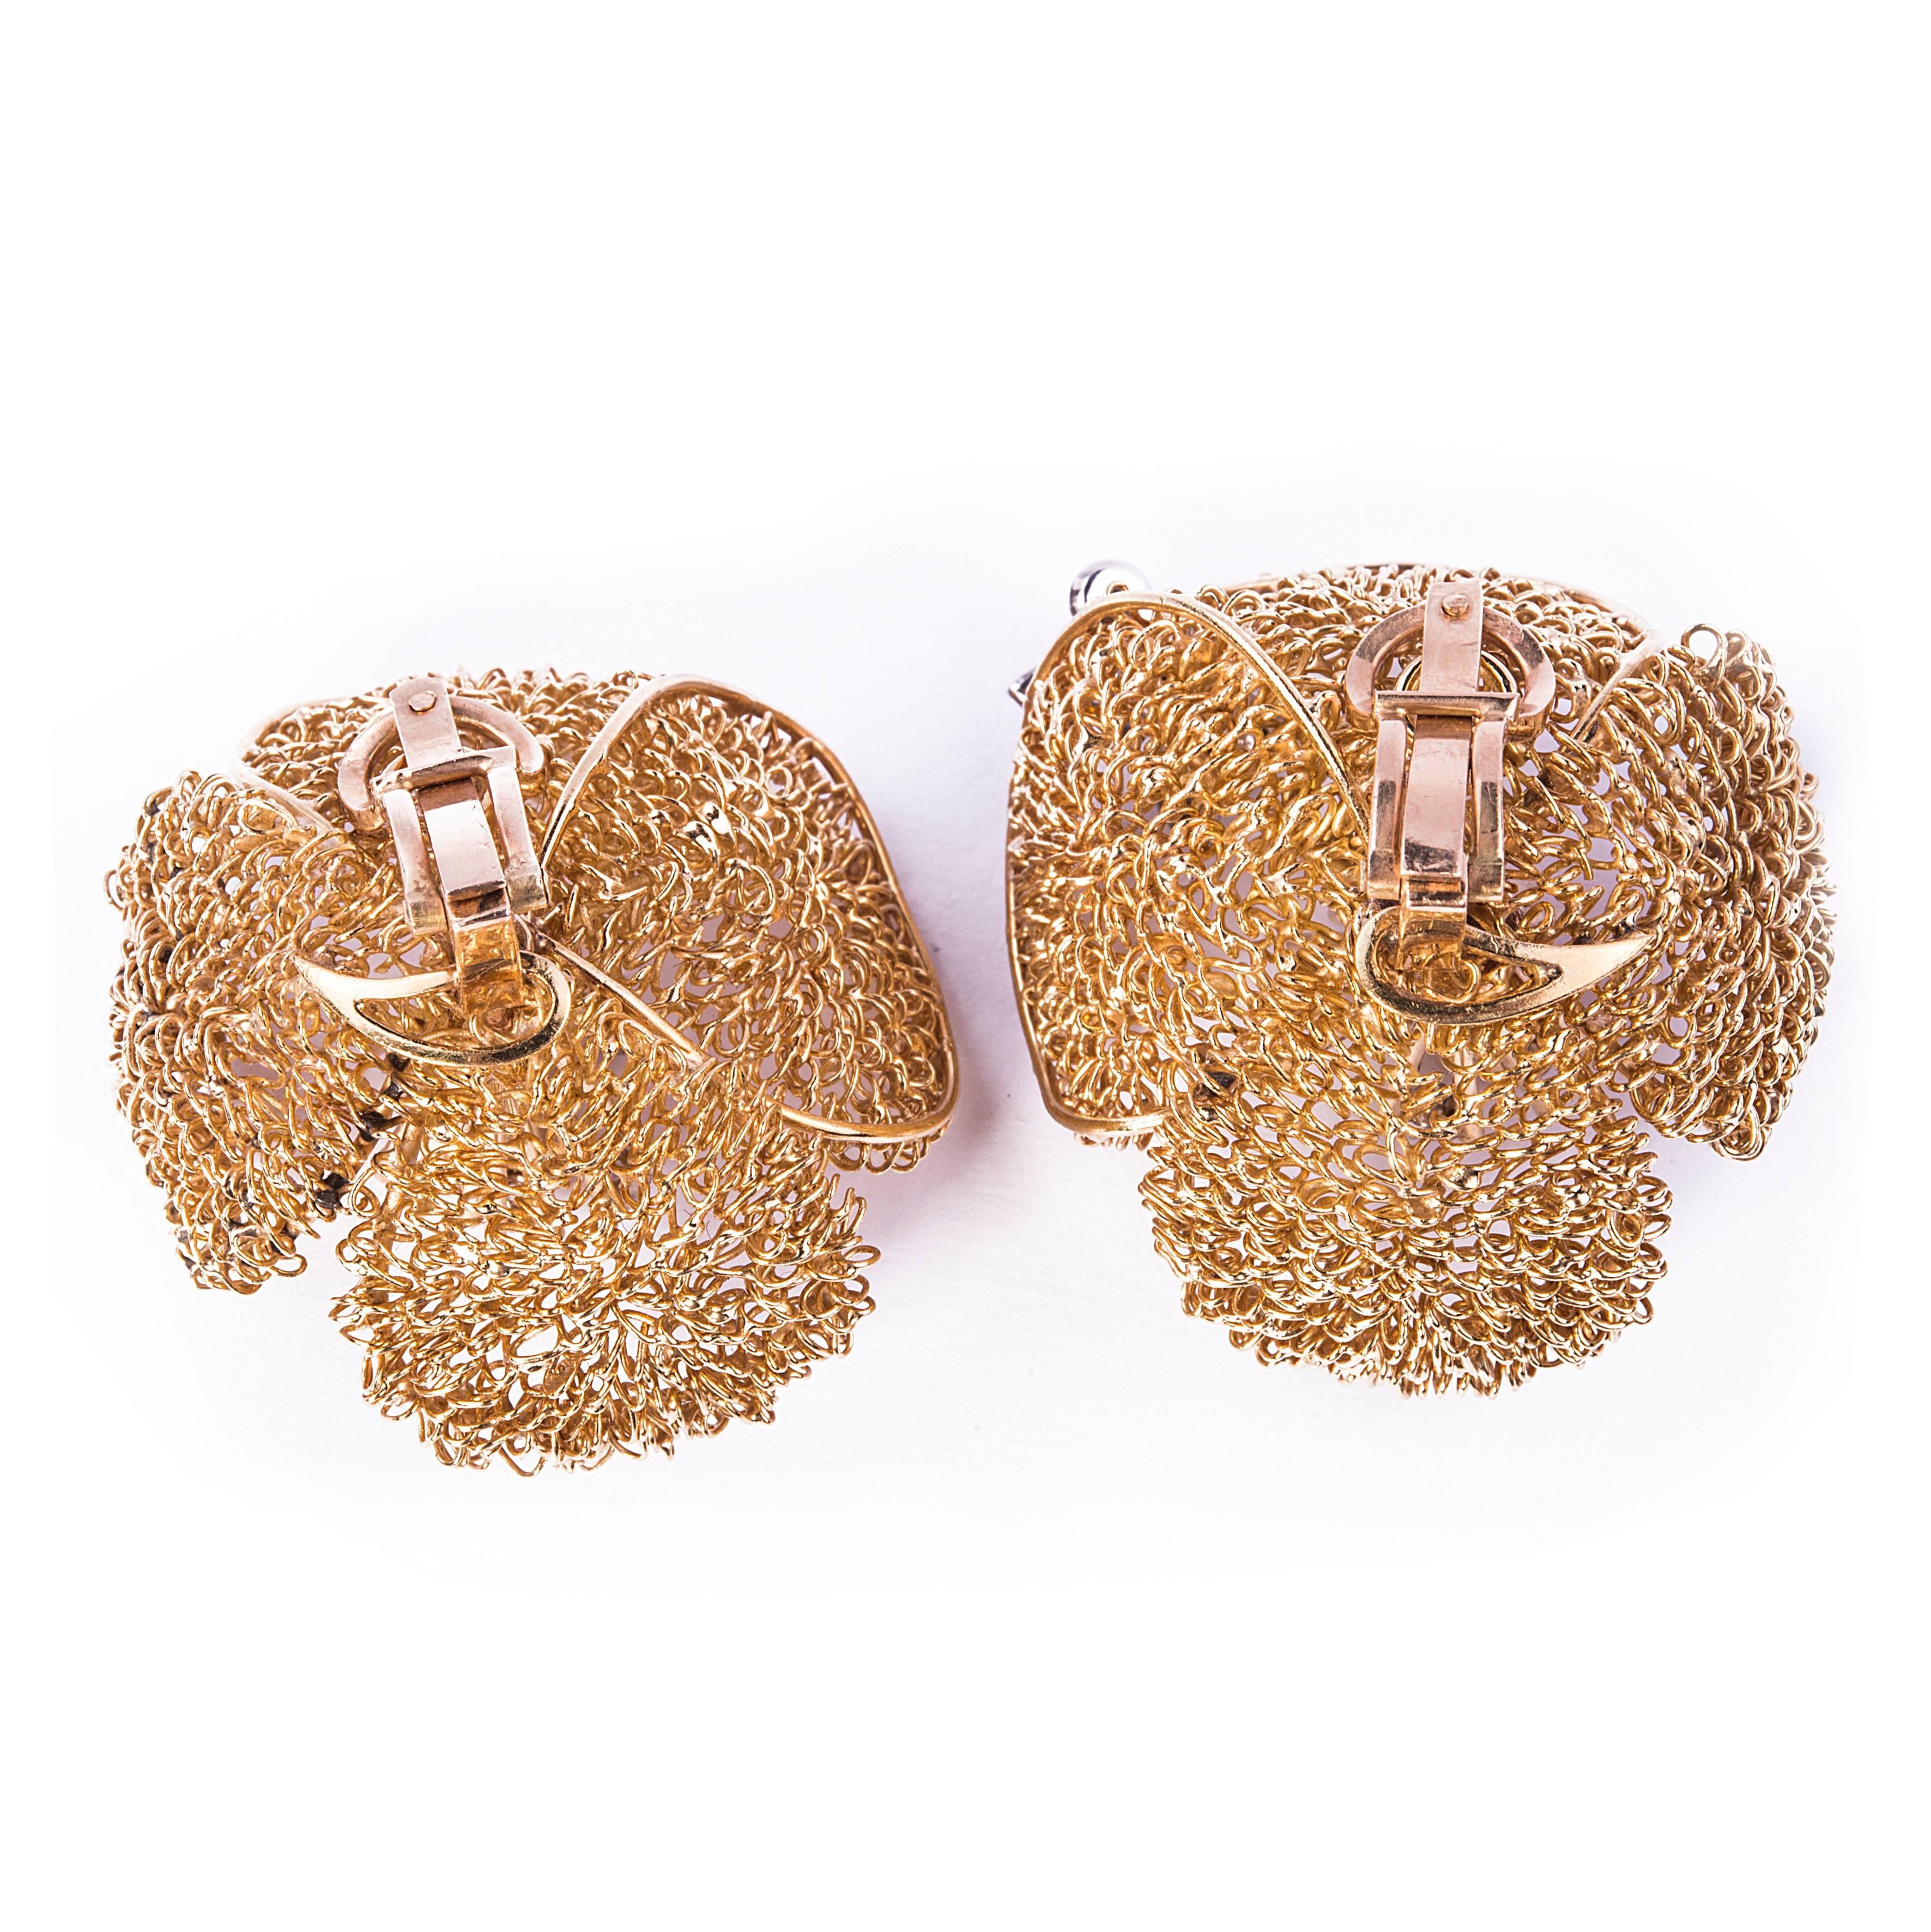 A pair of 18 kt gold vintage flower earrings. Each earring is centered by six diamonds. On one earring there a diamond butterfly is attached.